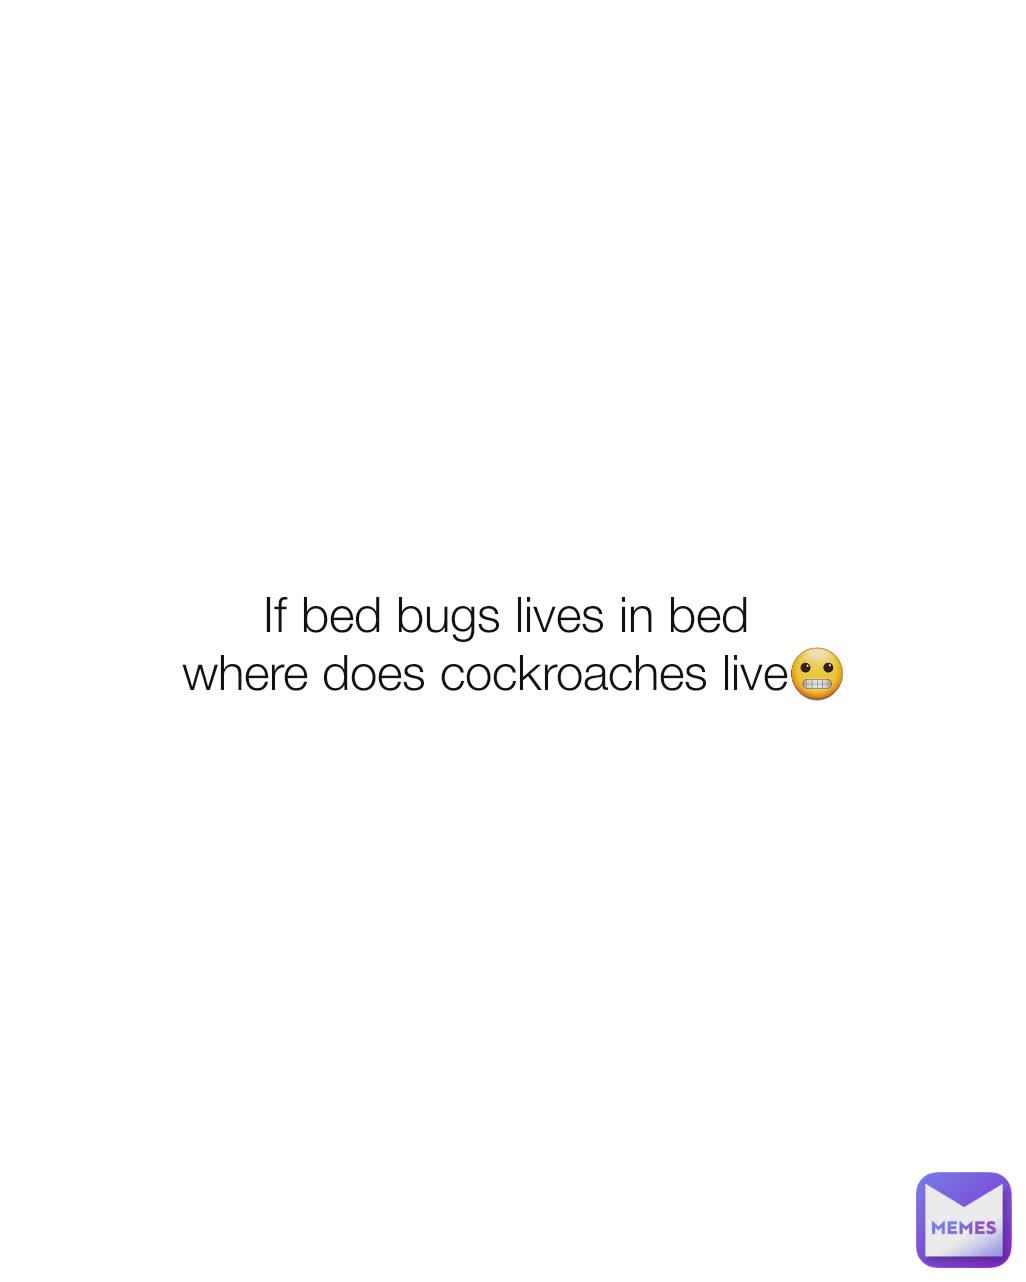 If bed bugs lives in bed 
where does cockroaches live😬